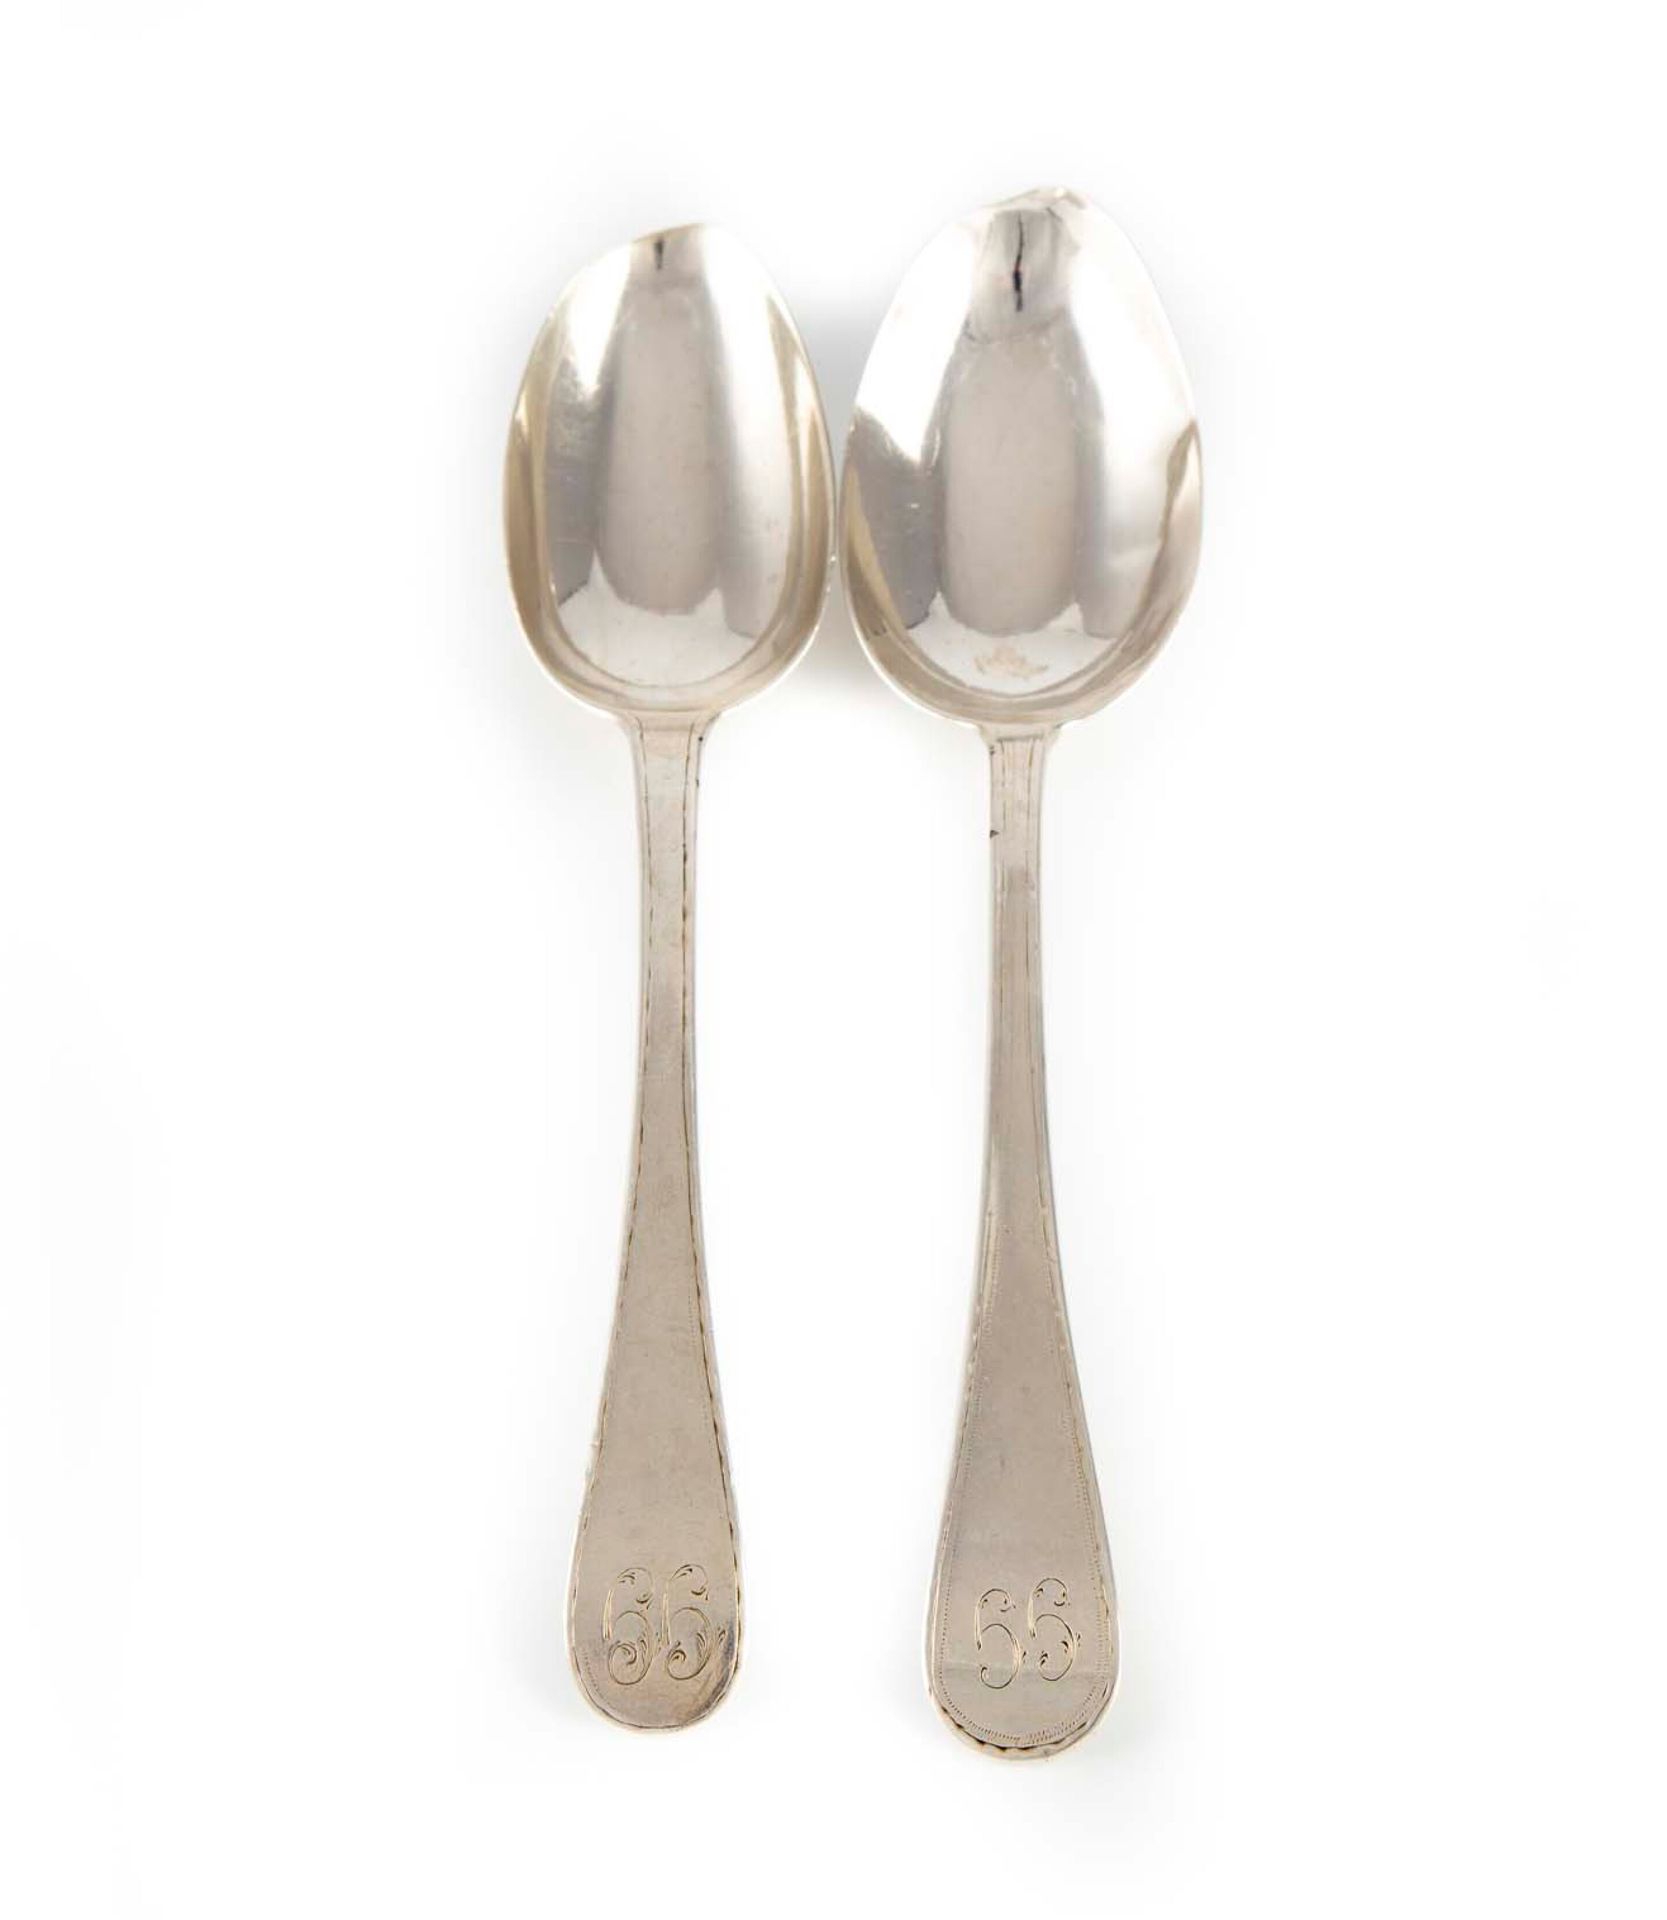 Paul REVERE Paul REVERE

Two spoons in plain silver the edge chased of a small g&hellip;